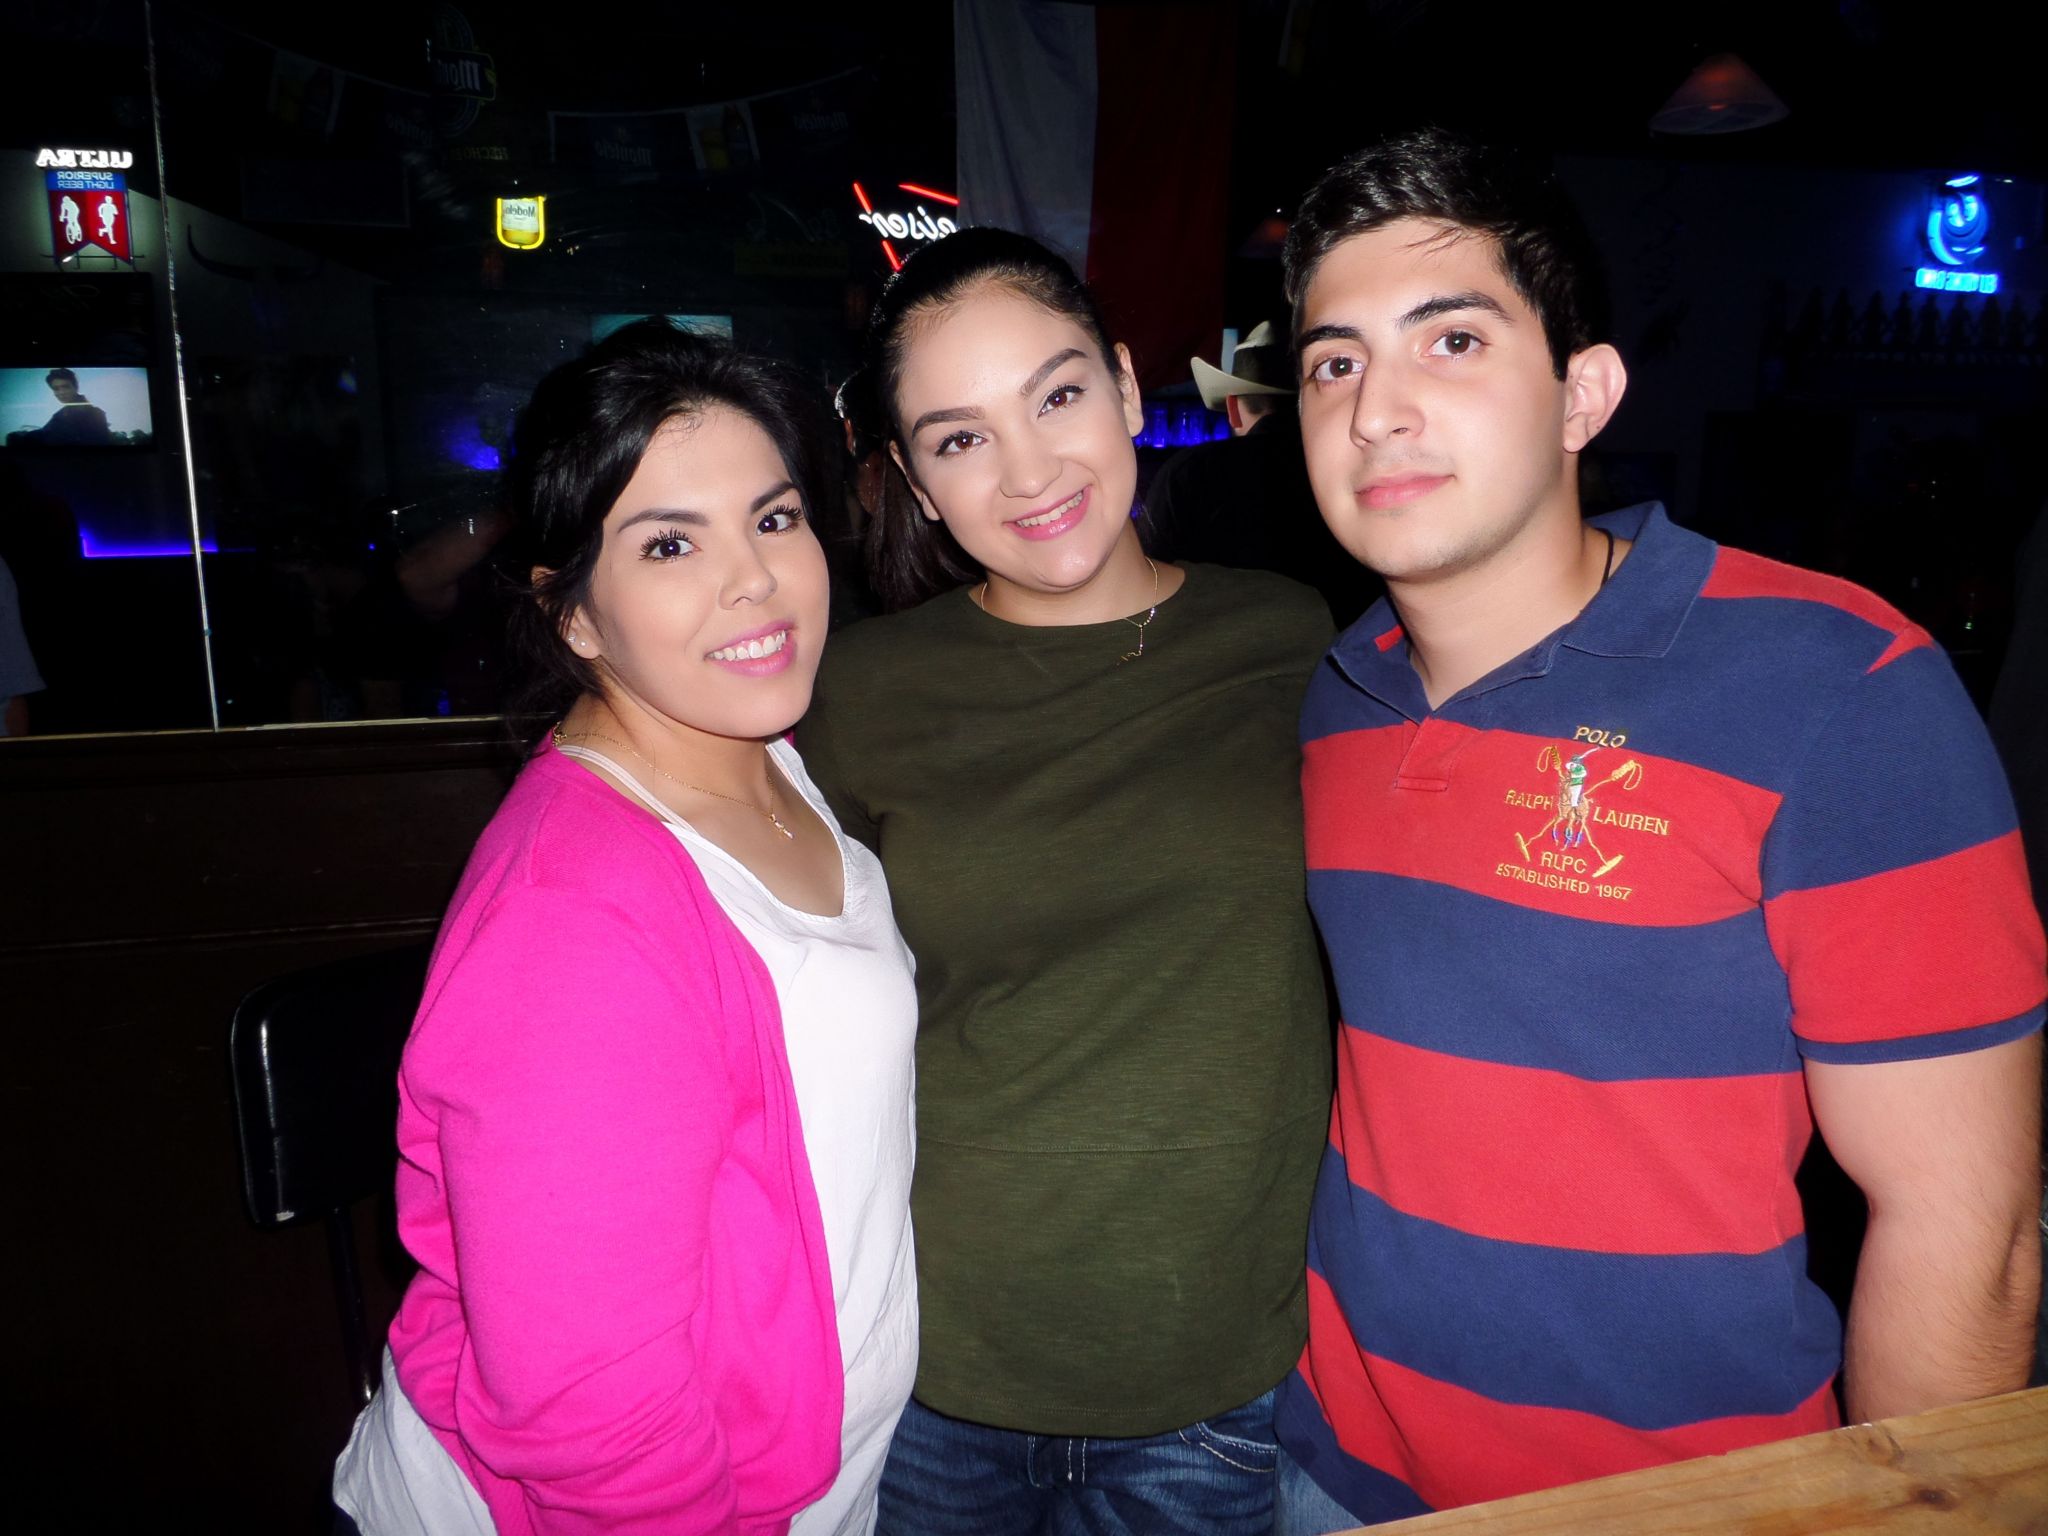 See what the Laredo nightlife looked like five years ago